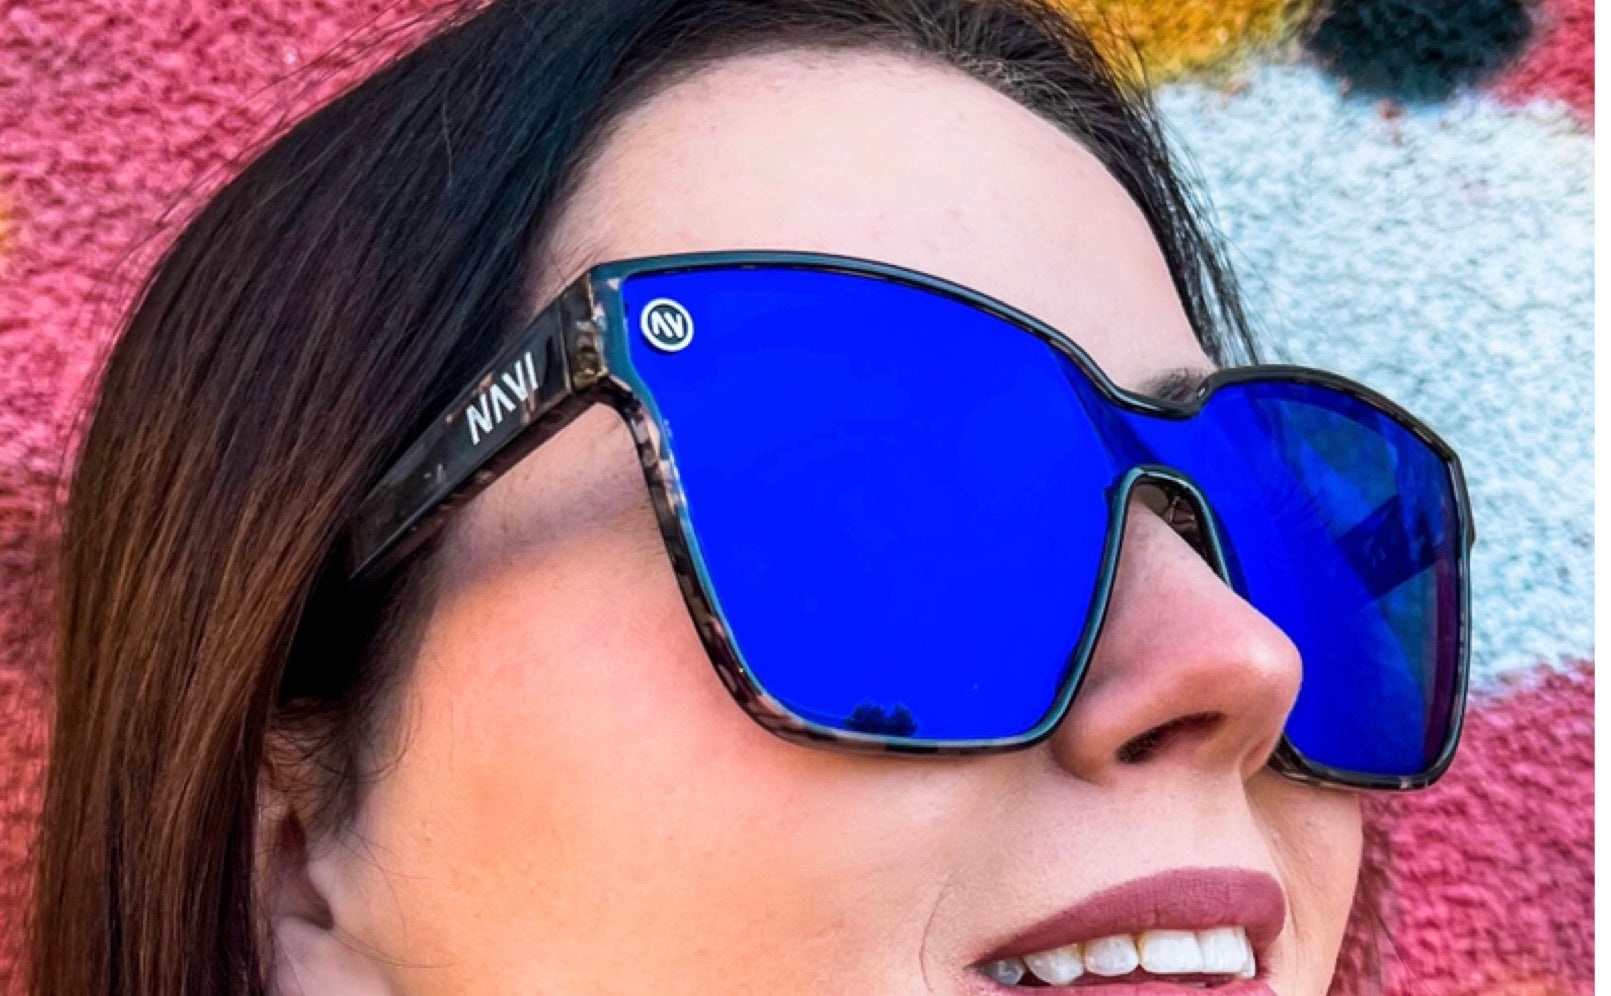 The Best Sunglasses for Women: Top Picks from Navi eyewear for Style and Protection